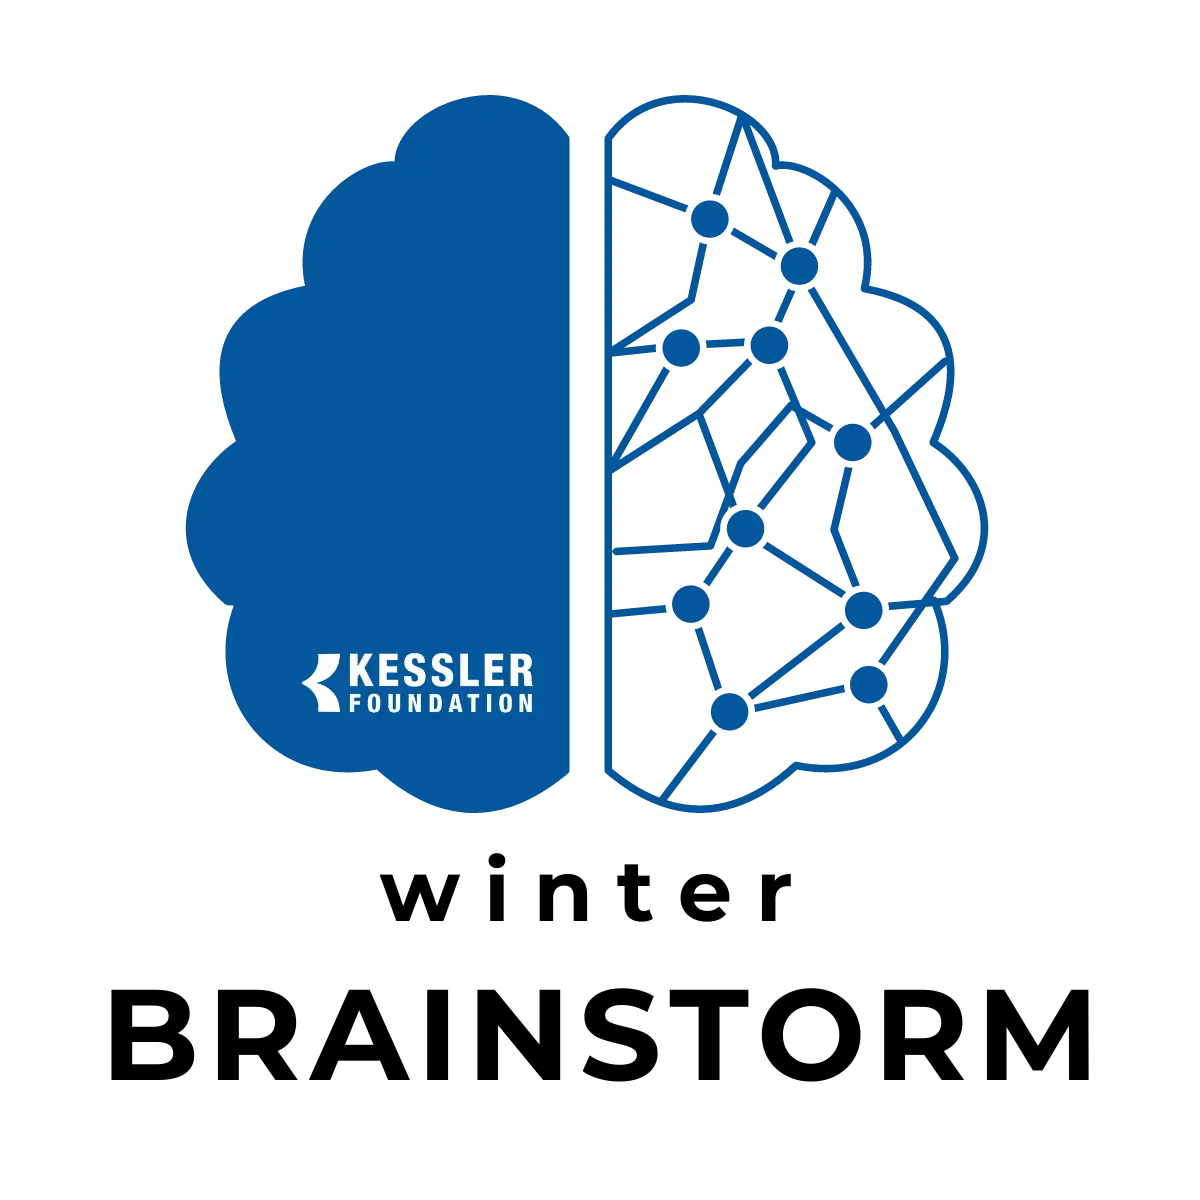 Illustration of a human brain colored in blue with Kessler Foundation logo.